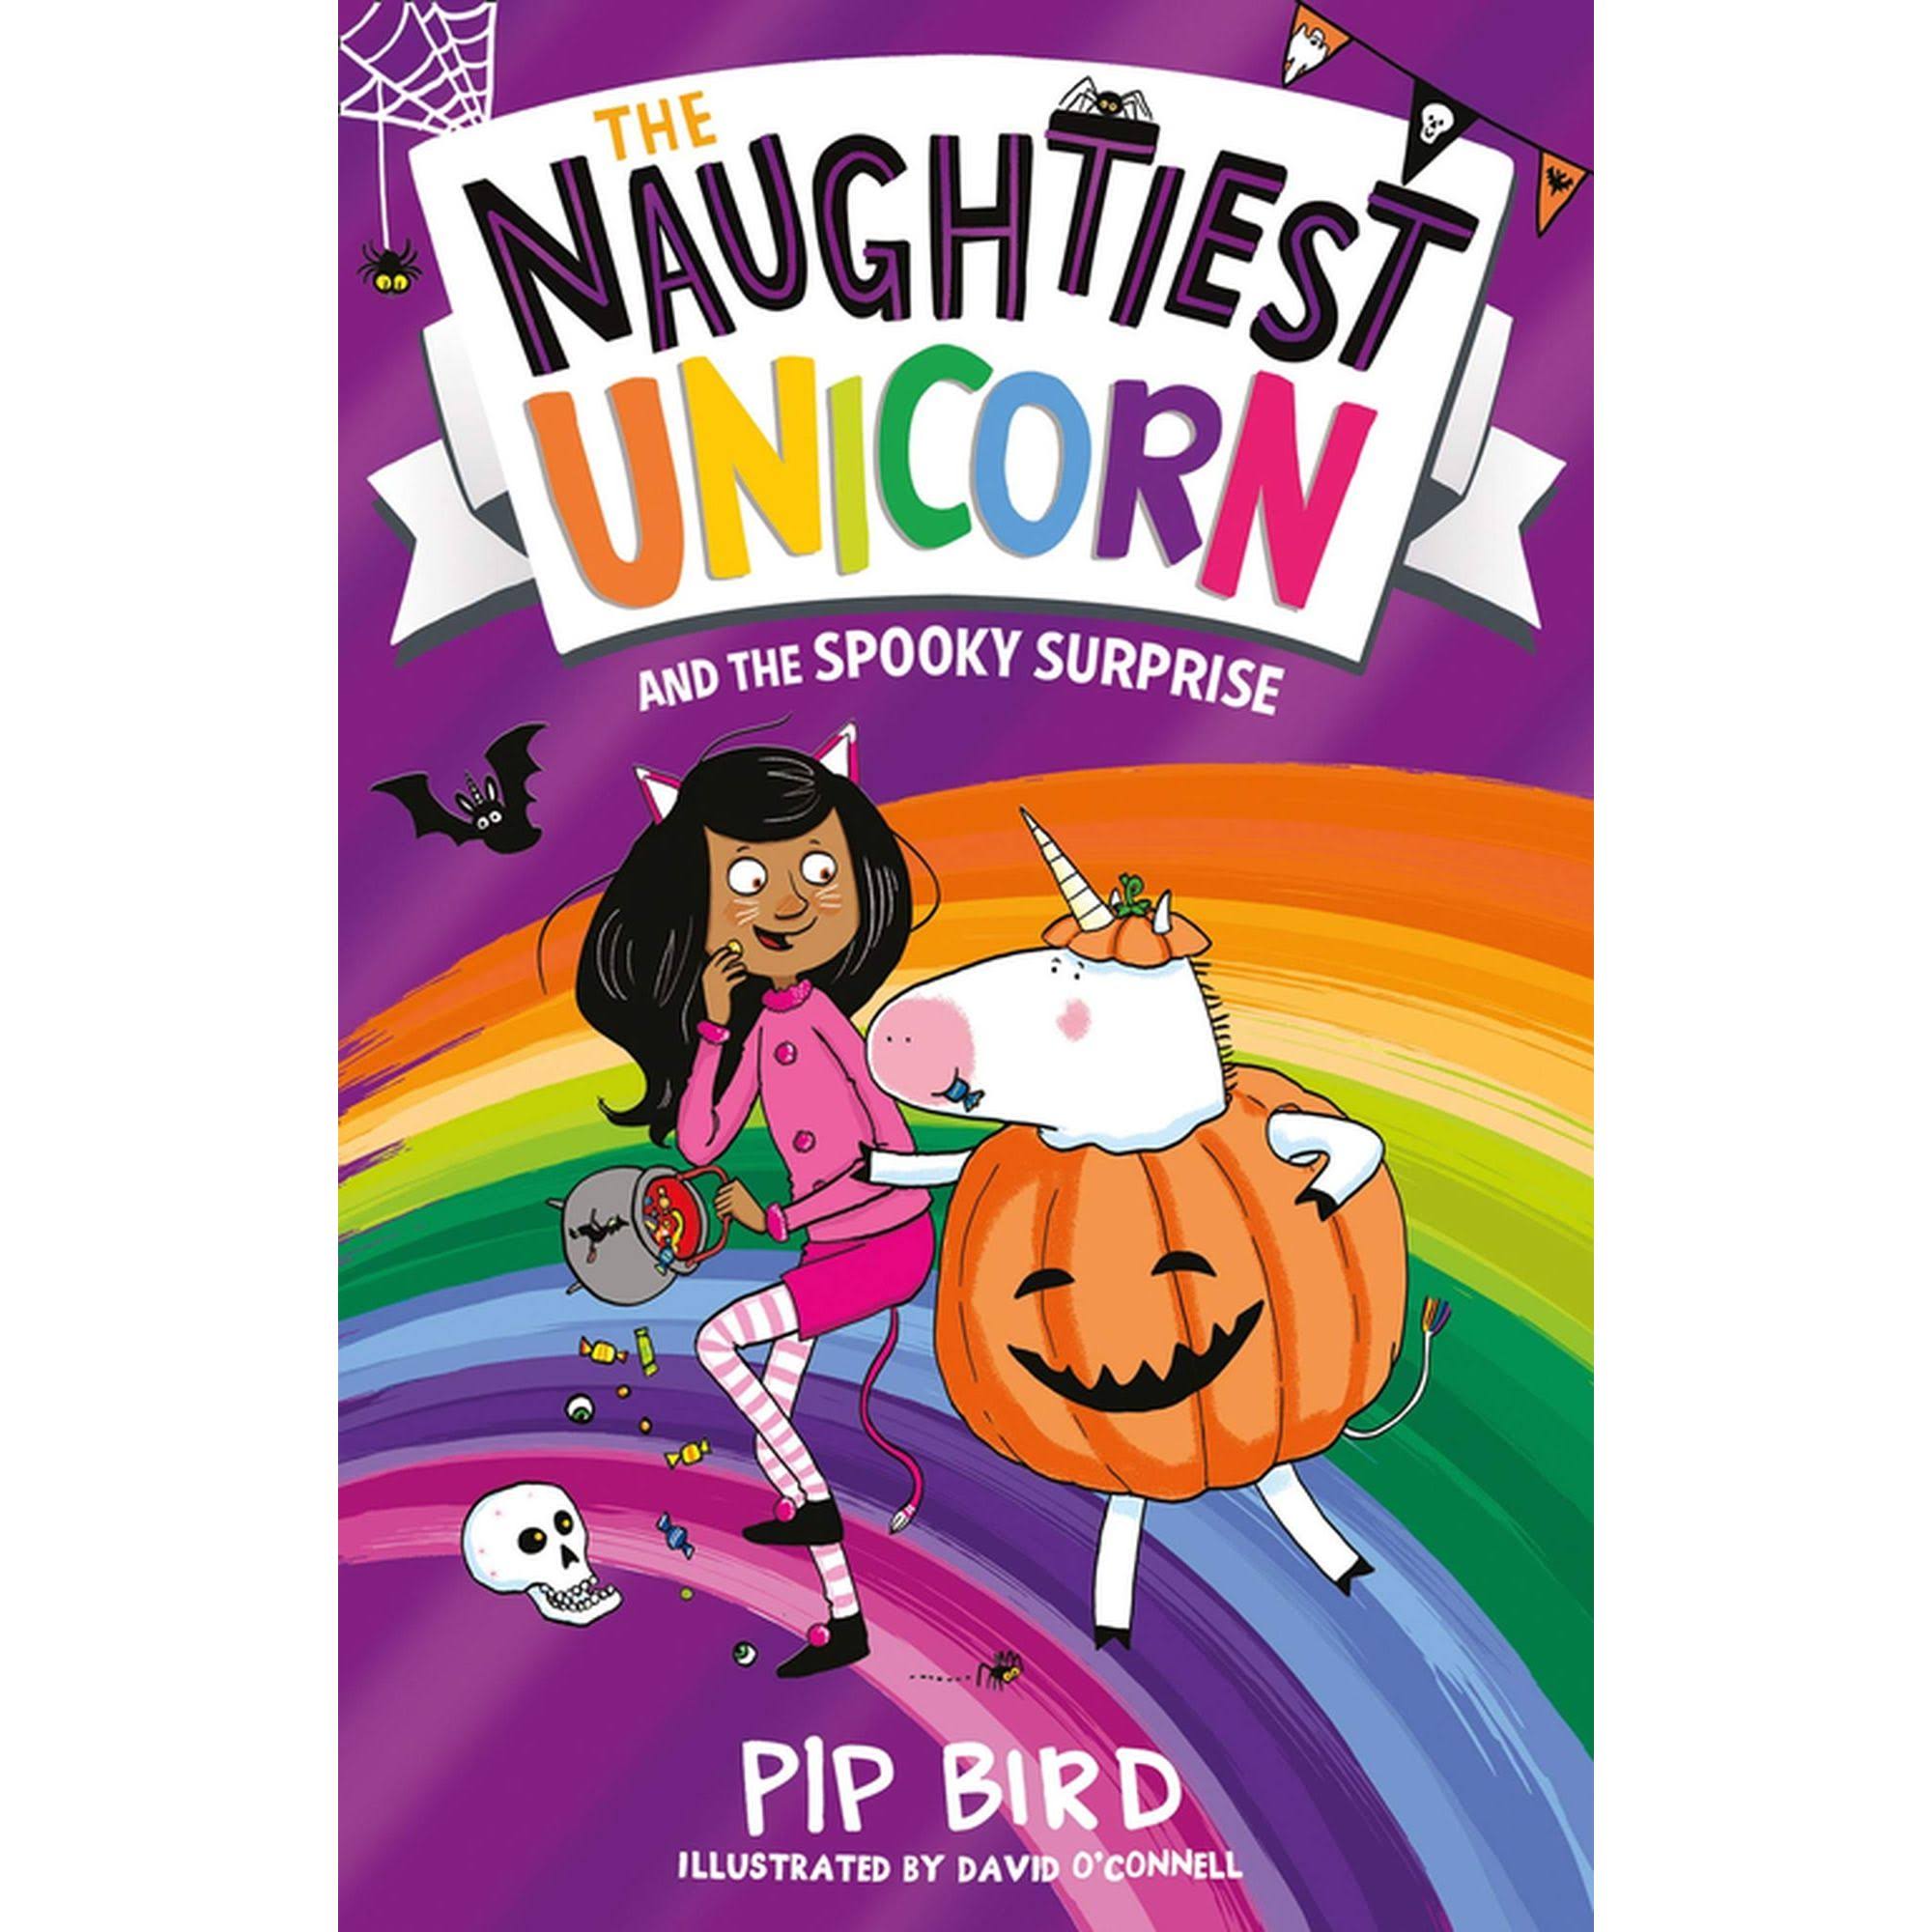 The Naughtiest Unicorn and The Spooky Surprise